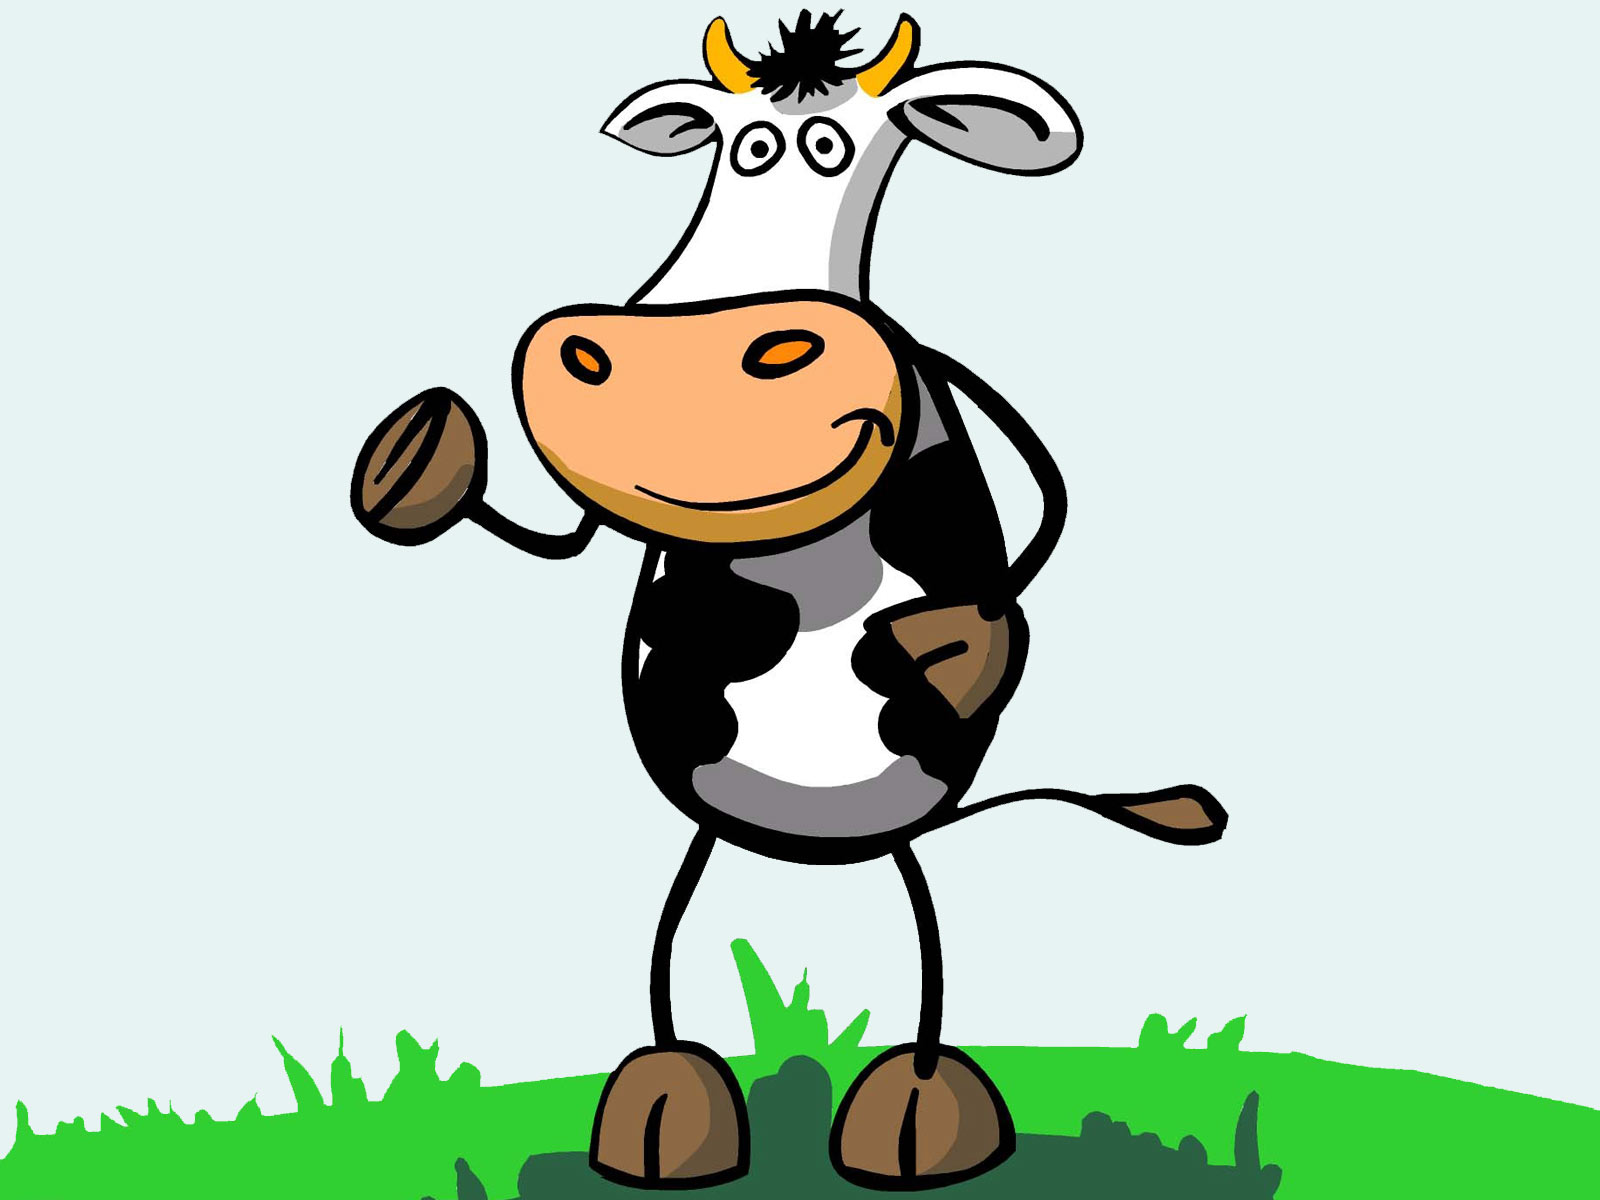 Download Cartoon Cow Picture Wallpaper 1600x1200 | Full HD Wallpapers